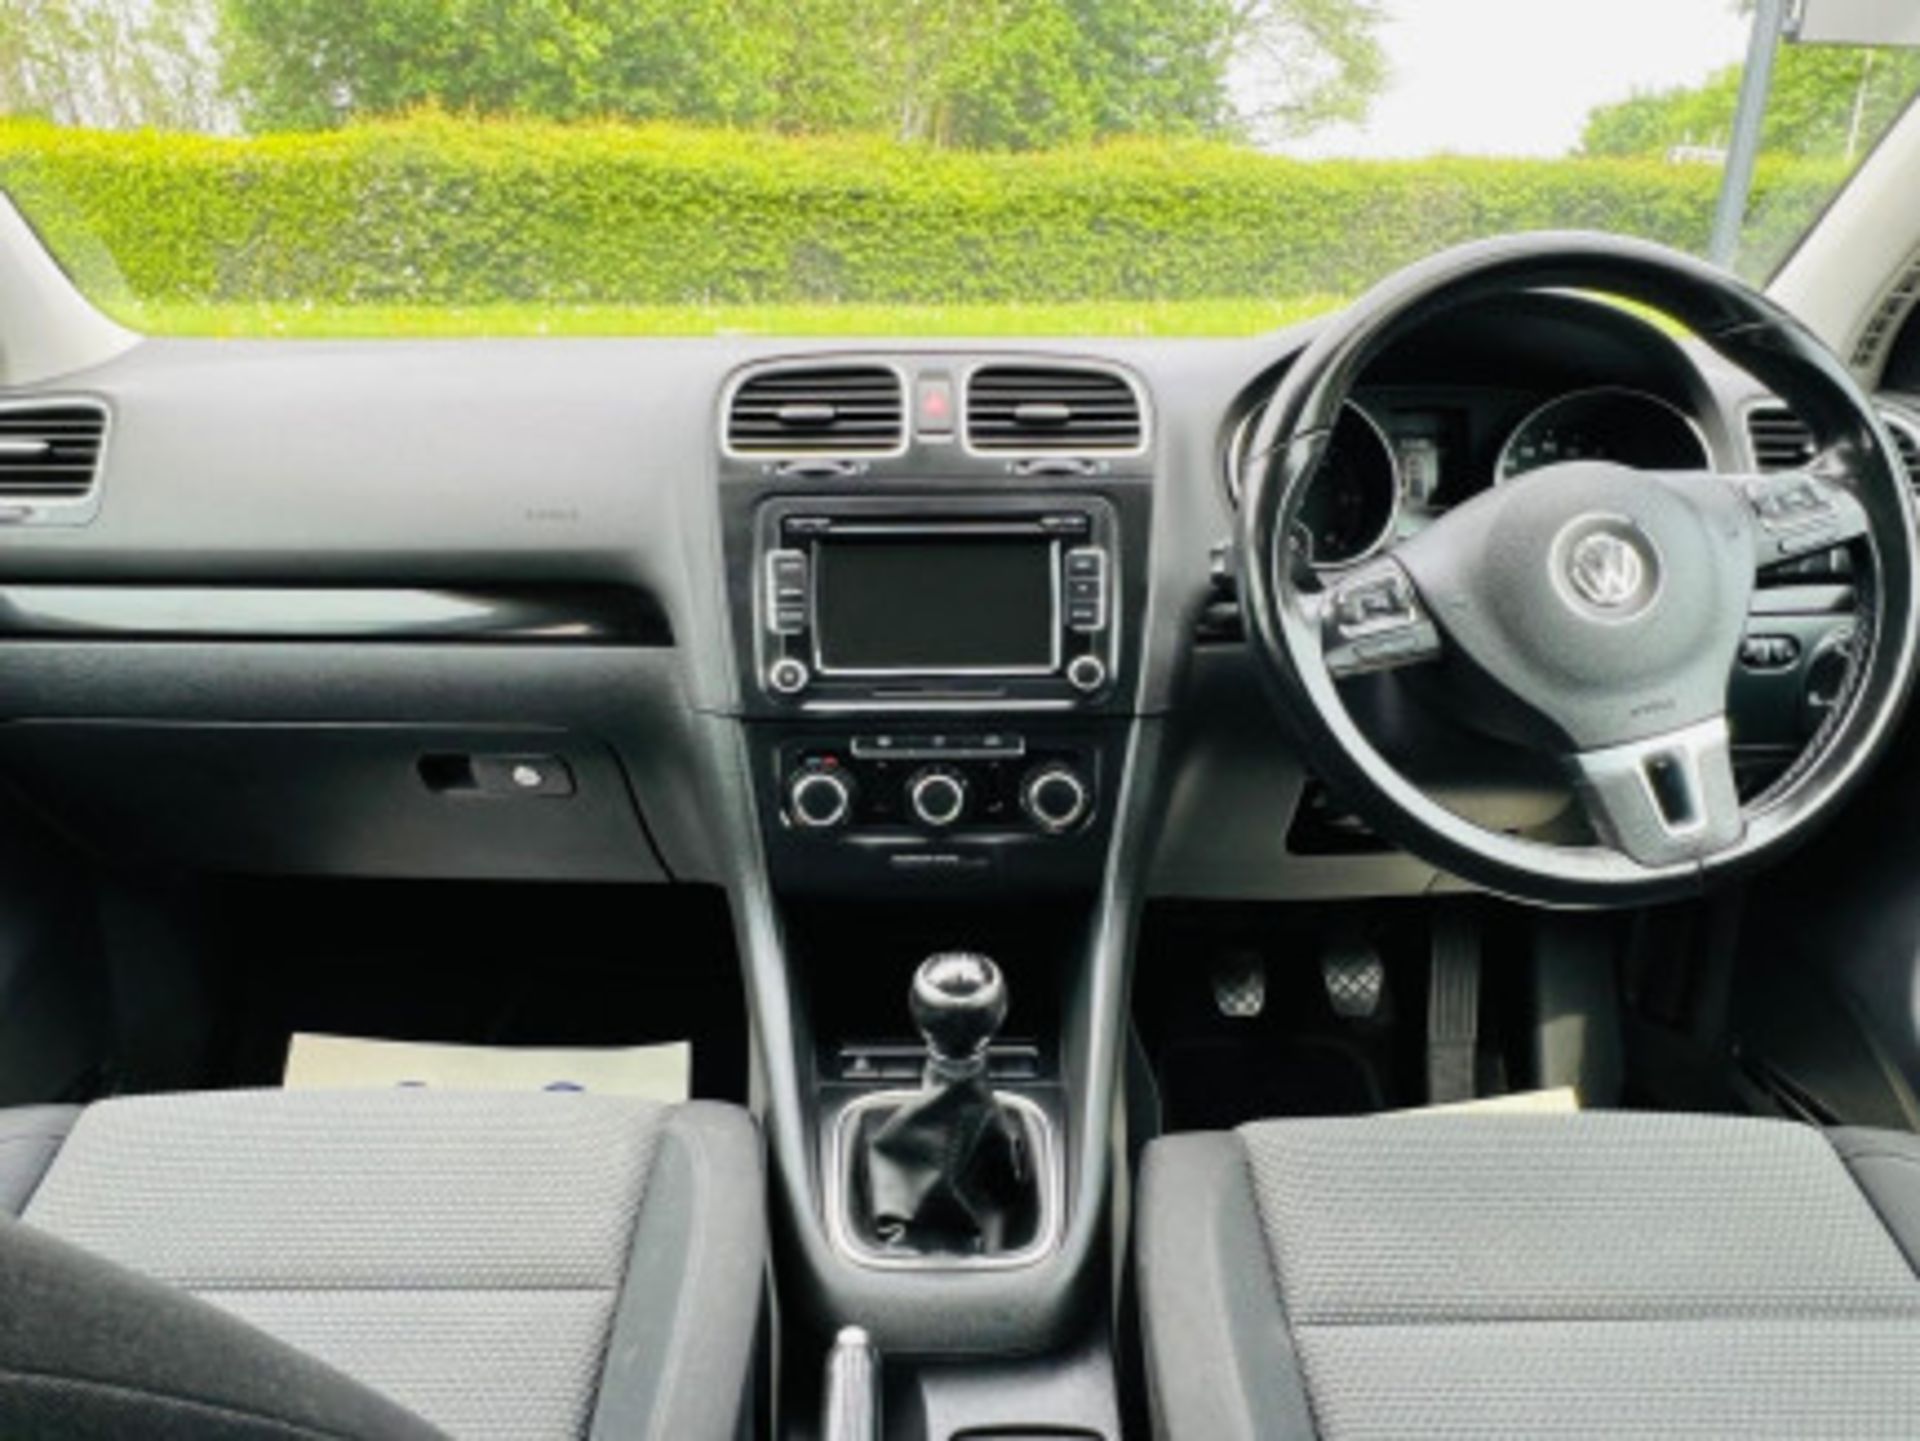 IMPECCABLE 2012 VOLKSWAGEN GOLF 1.6 TDI MATCH >>--NO VAT ON HAMMER--<< - Image 18 of 116